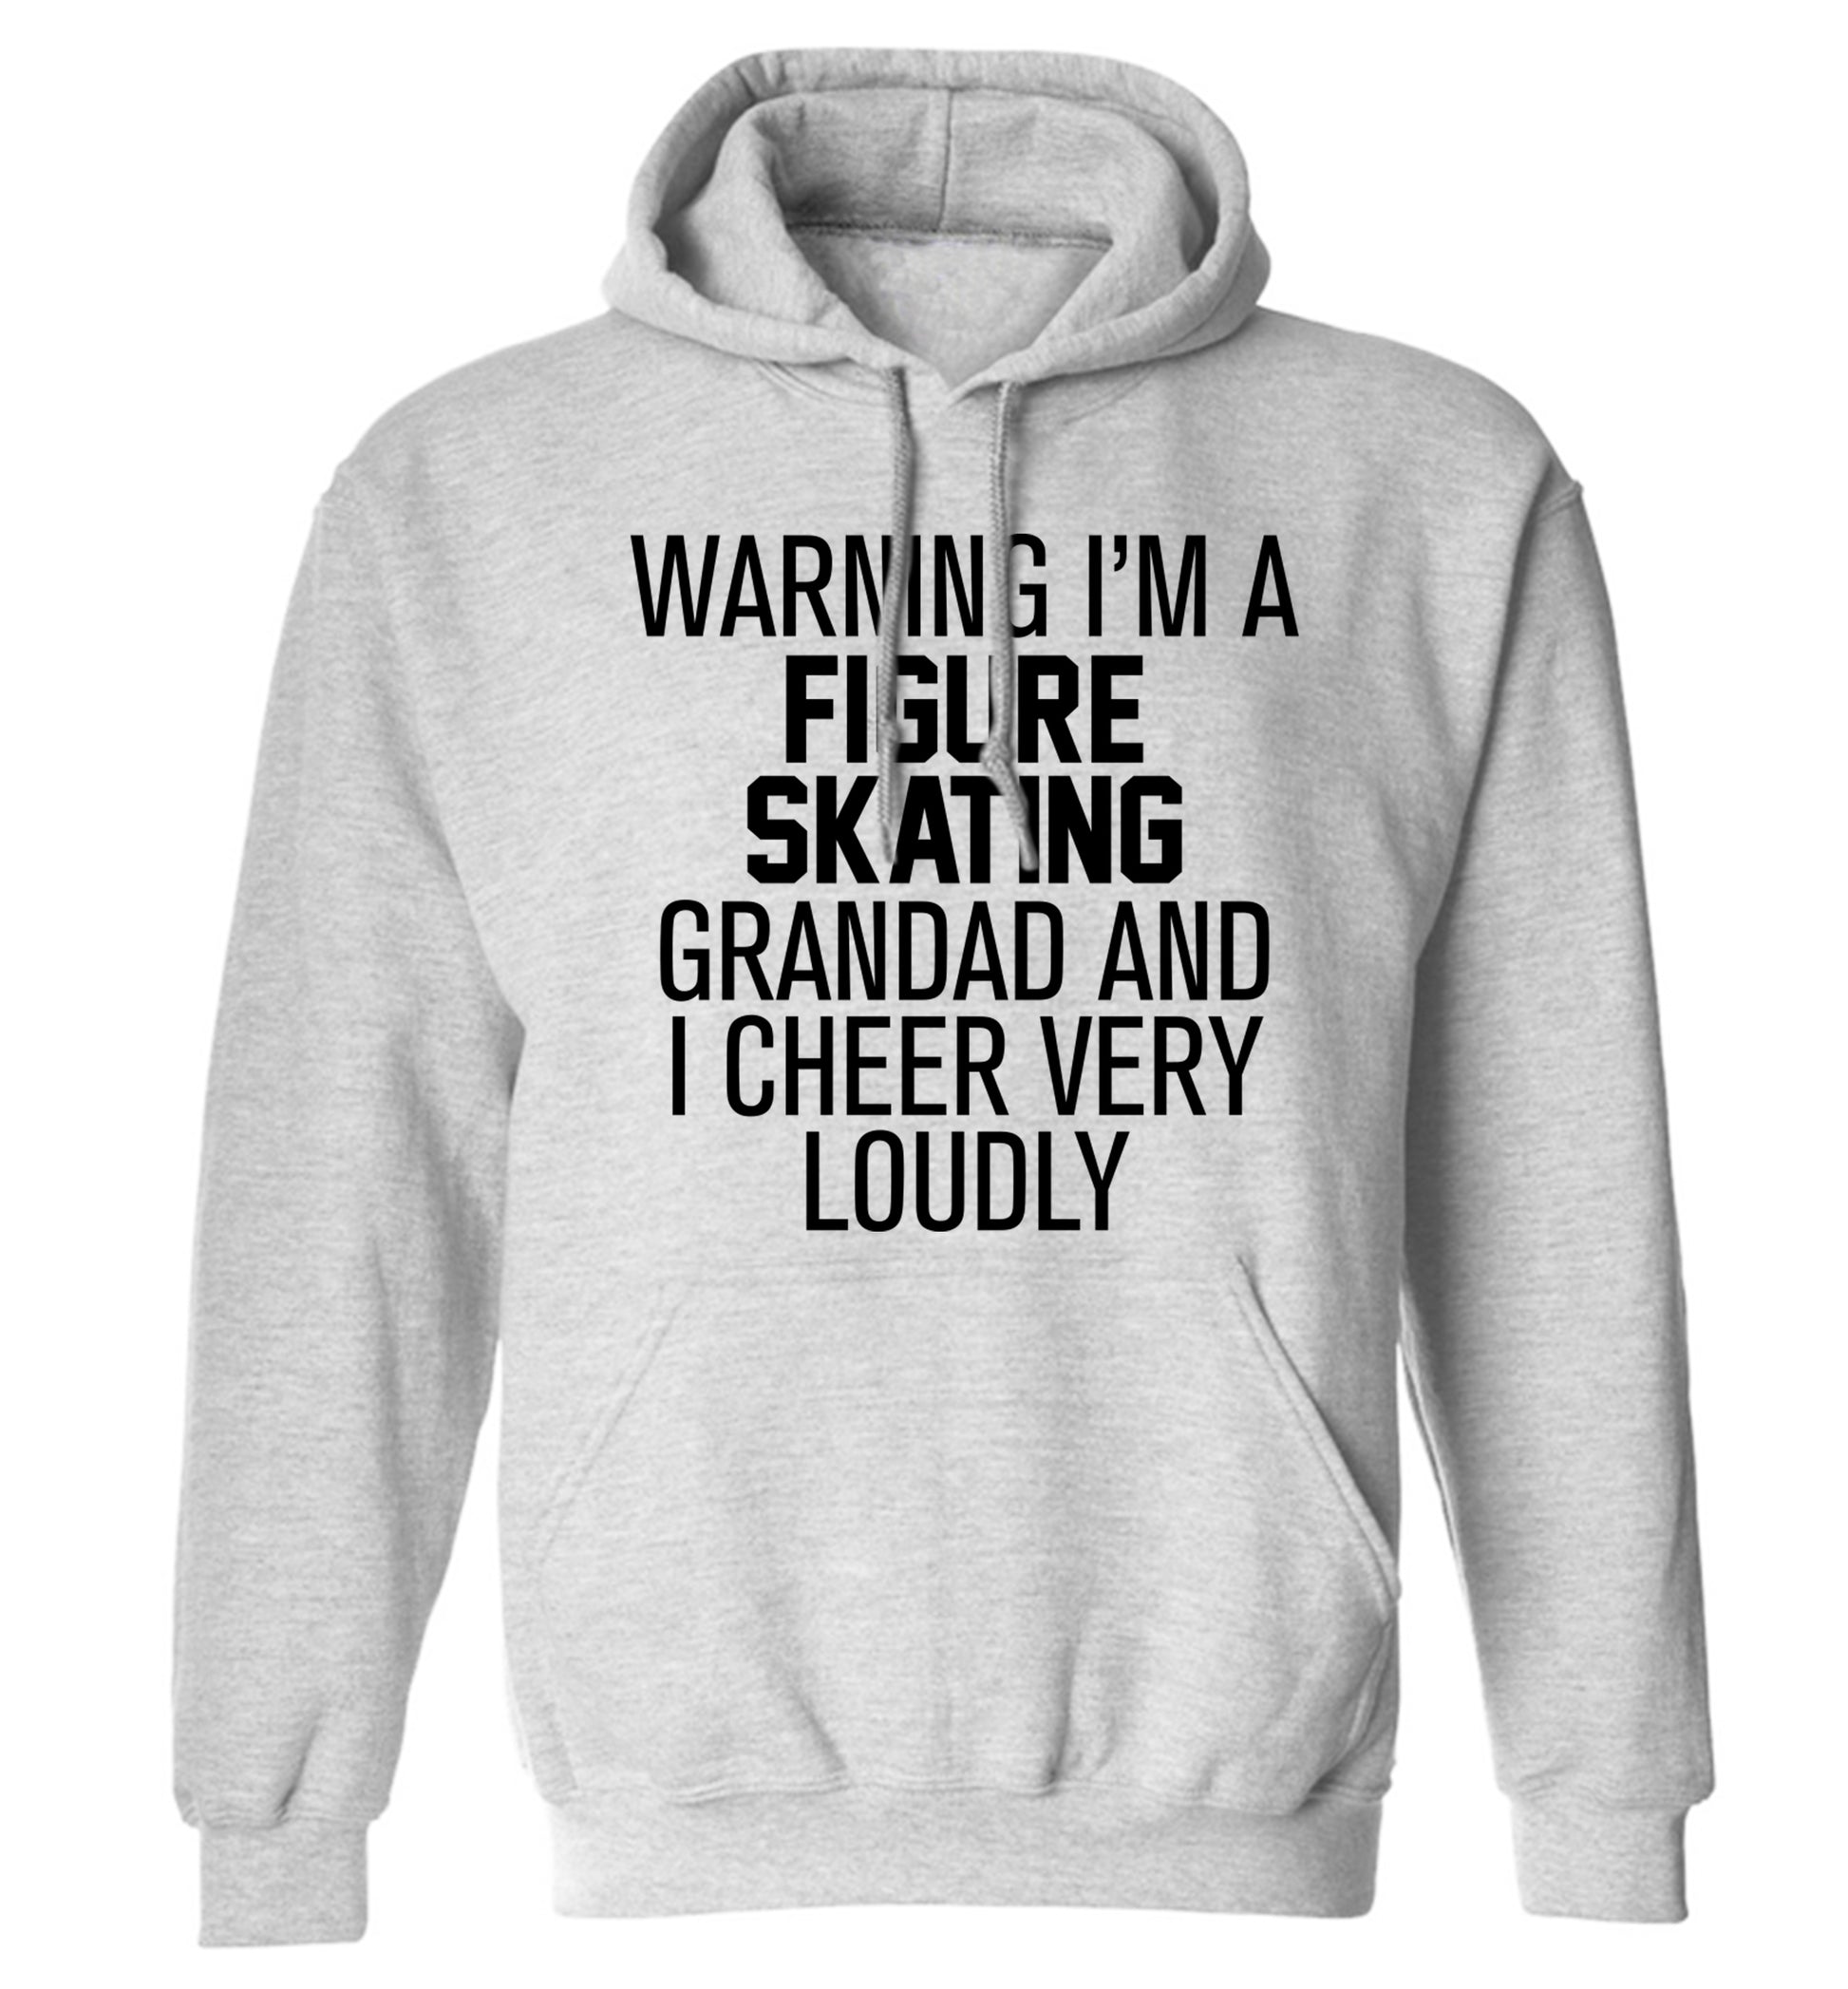 Warning I'm a figure skating grandad and I cheer very loudly adults unisexgrey hoodie 2XL